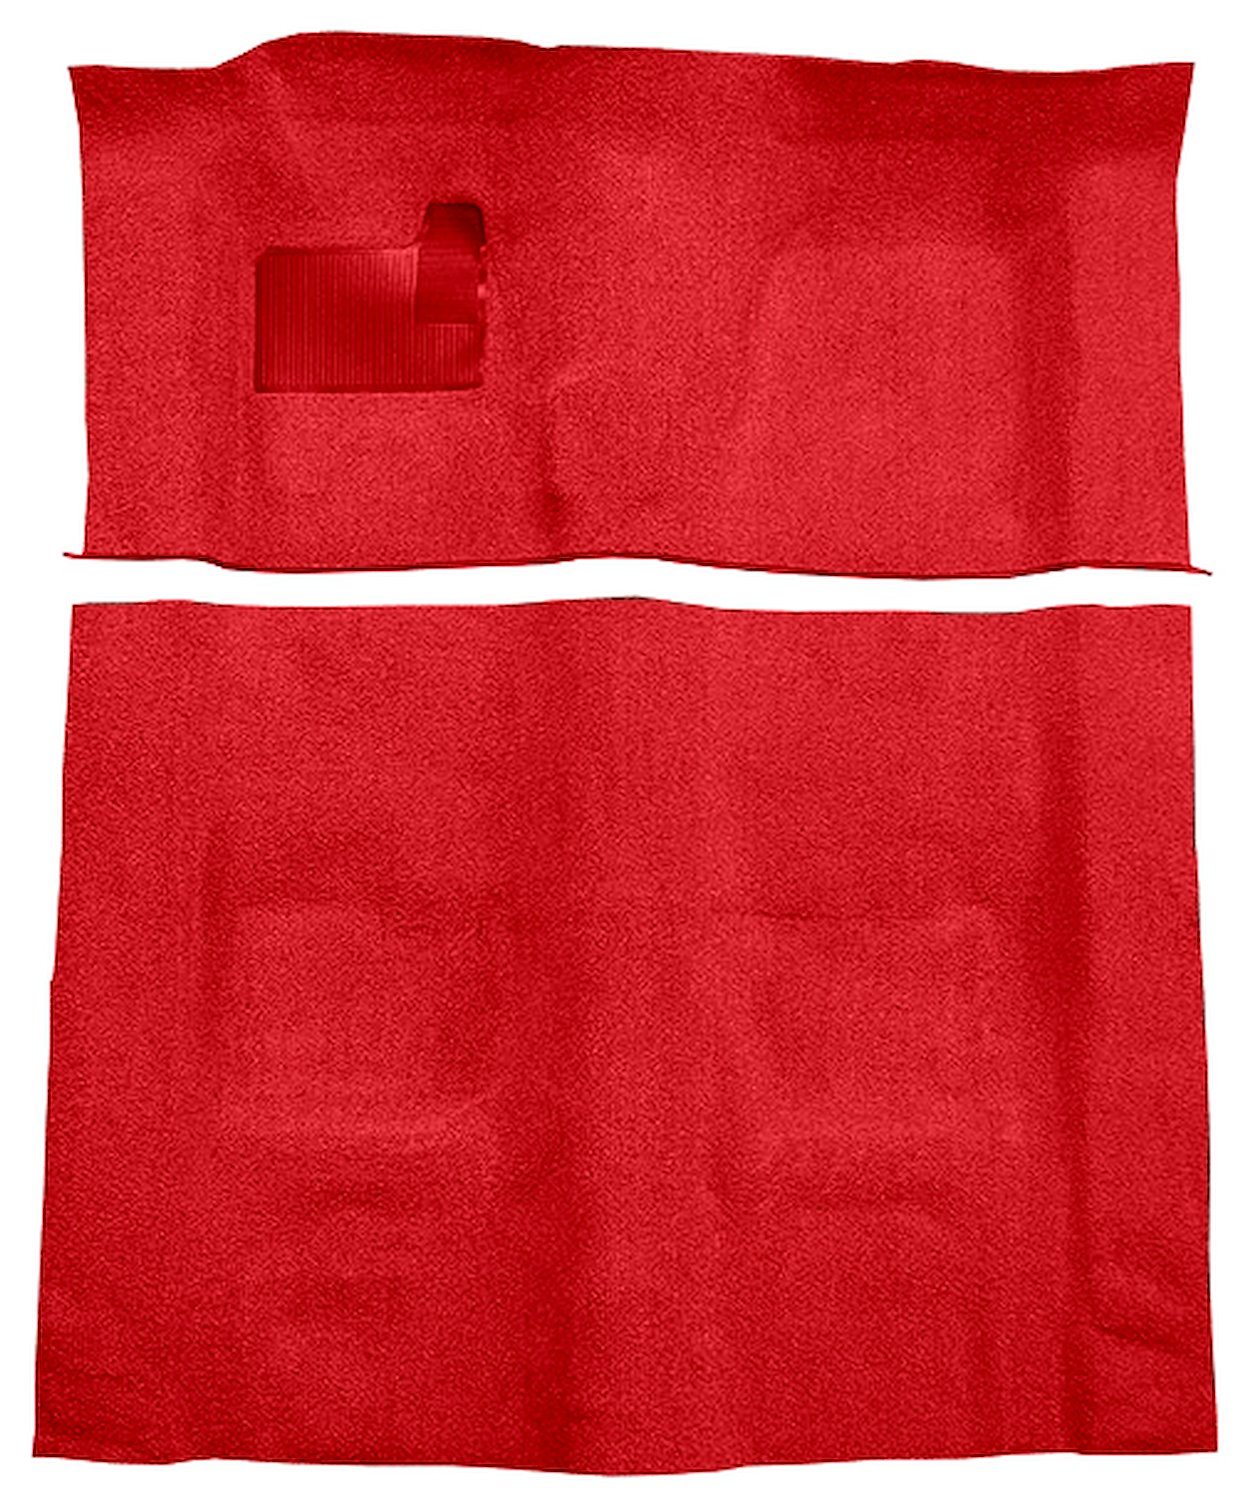 Molded Cut Pile Carpet for 1974-1975 Chevrolet Camaro, Pontiac Firebird [OE-Style Jute Backing, 4-Speed Transmission, Flame Red]